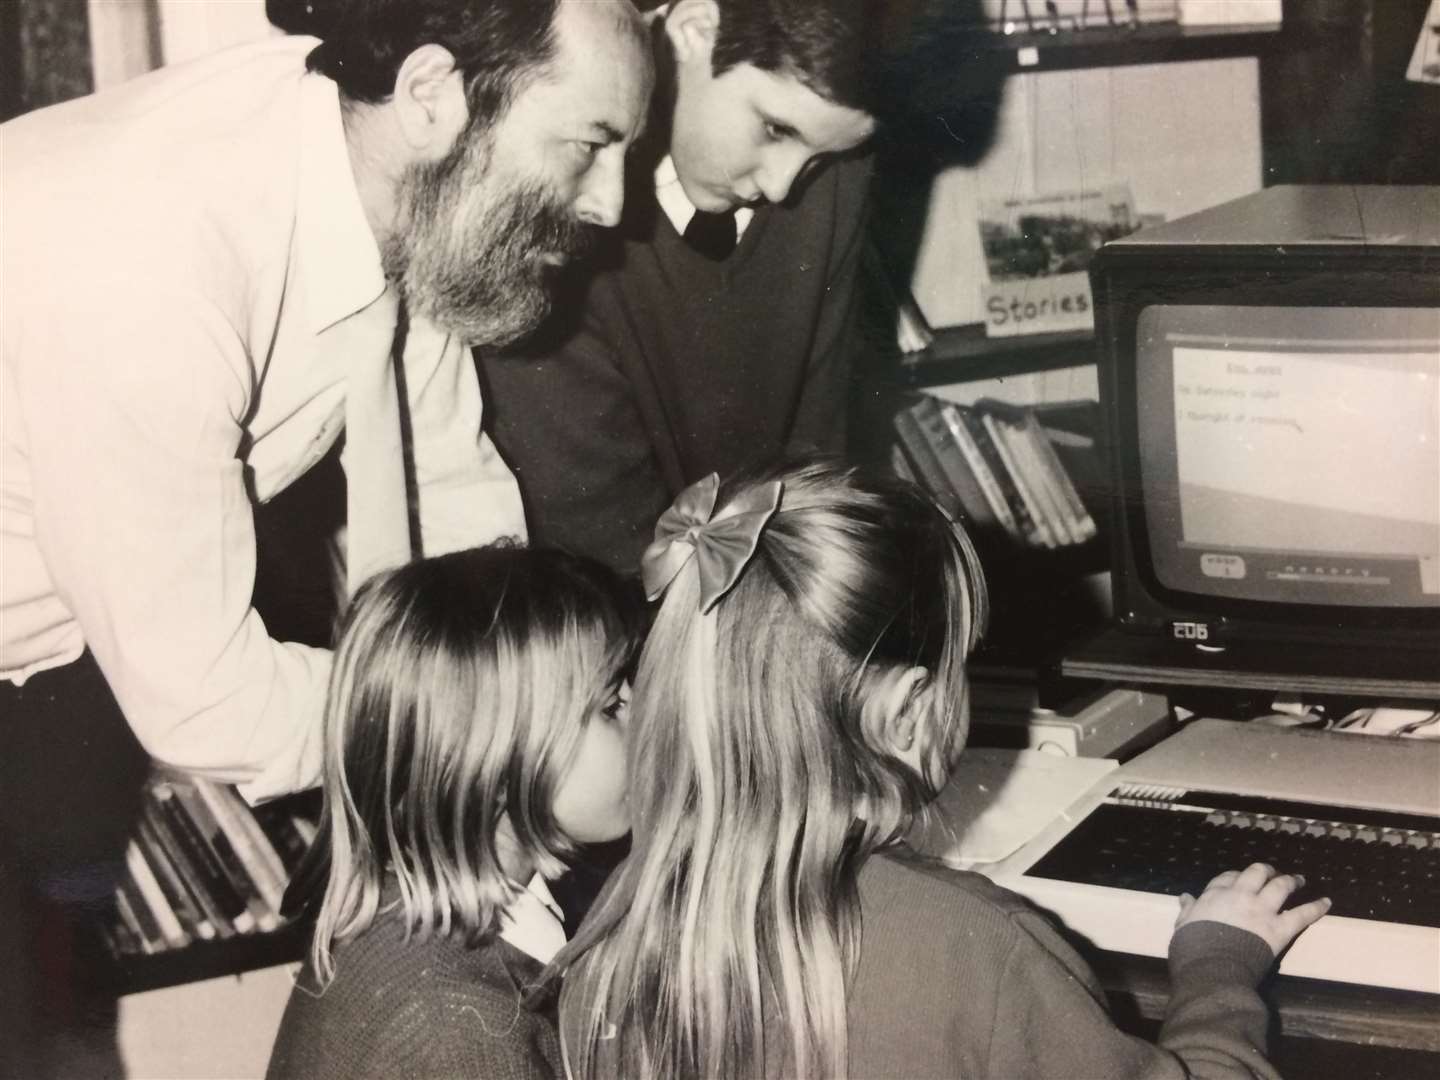 Pupils at Milstead and Frinsted School in Sittingbourne get to grips with the BBC Micro - cutting edge at the time